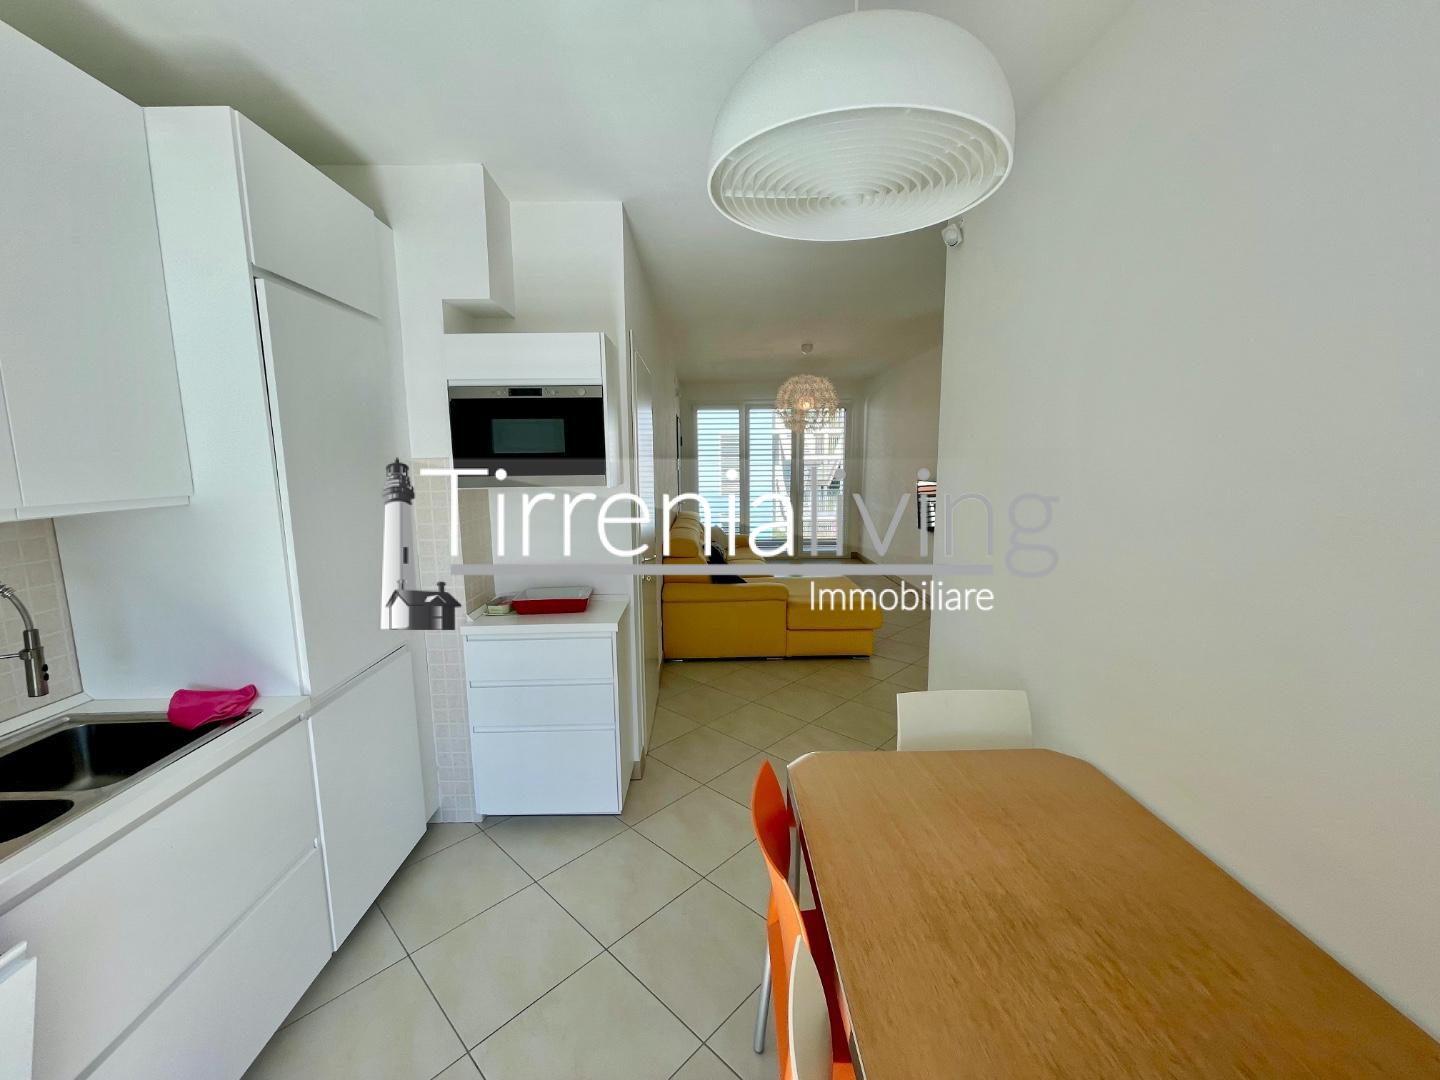 Apartment for holiday rentals, ref. A-534-e